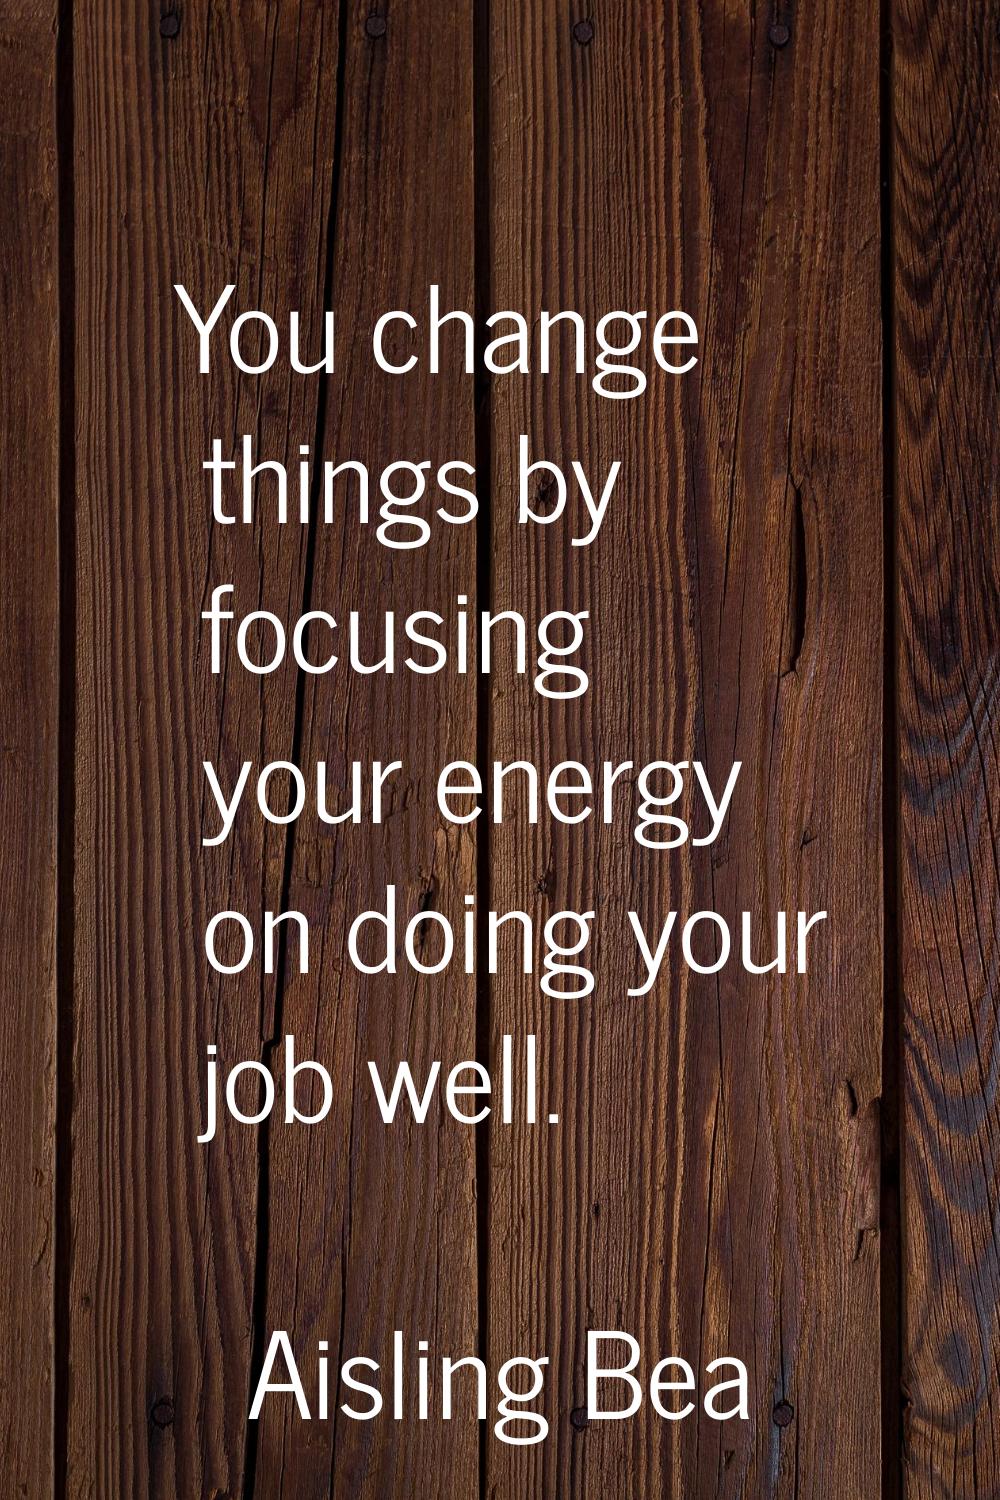 You change things by focusing your energy on doing your job well.